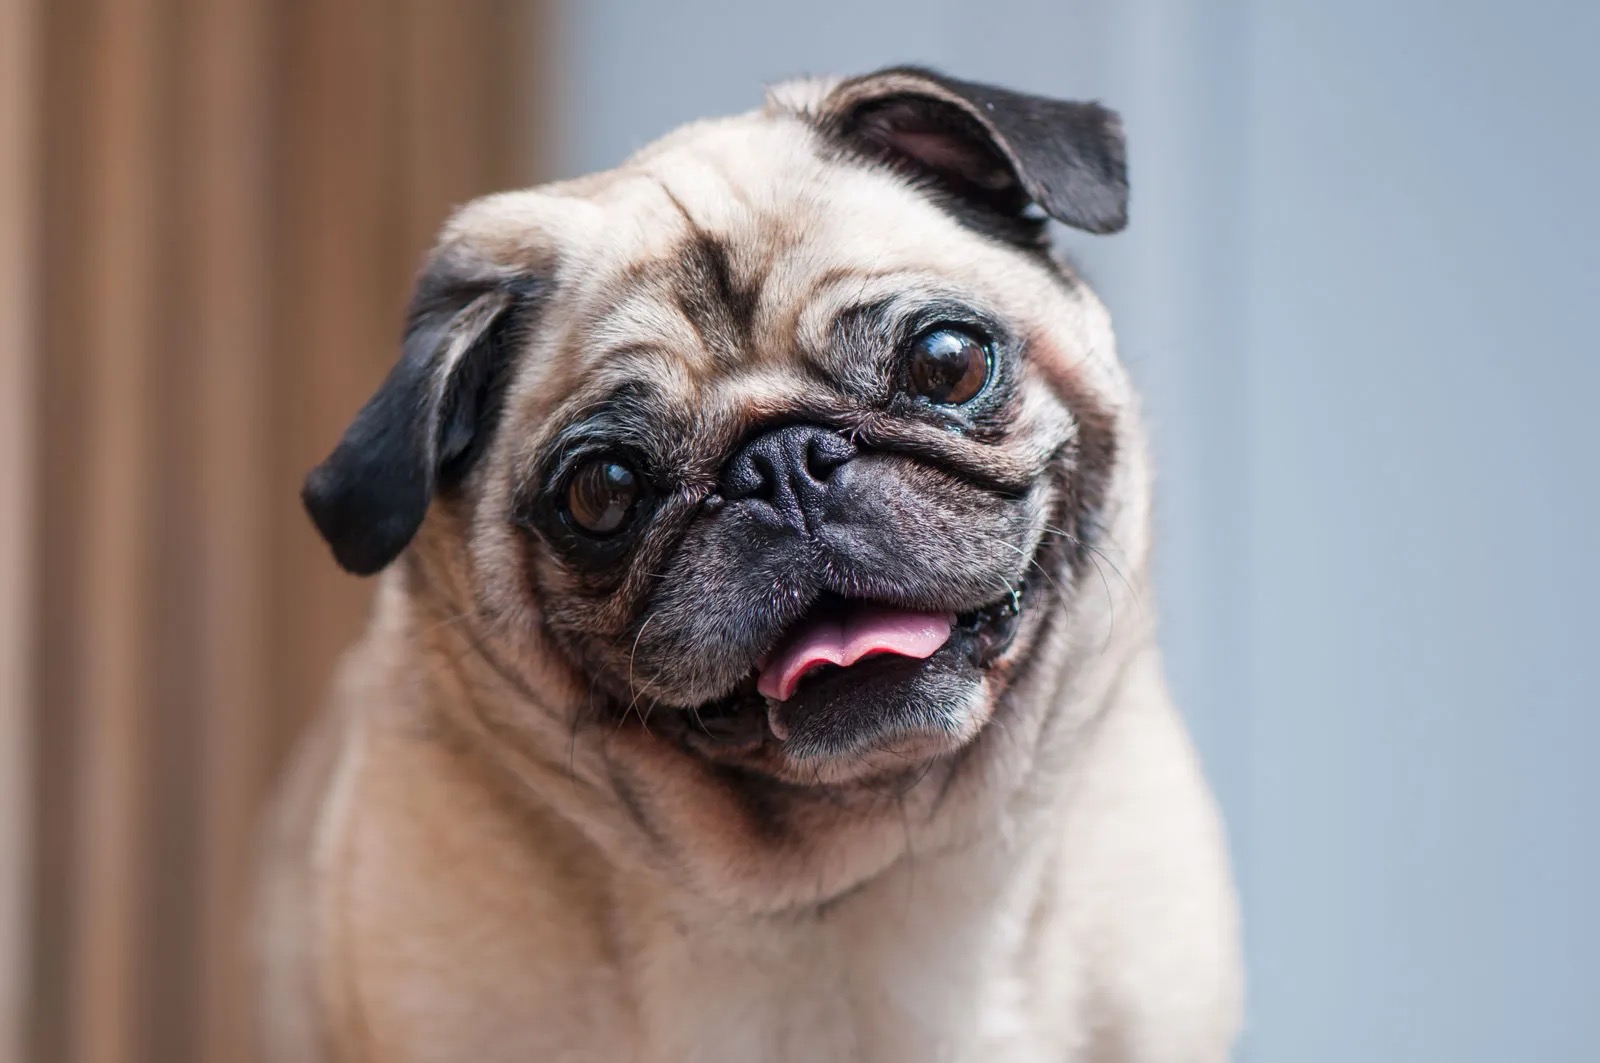 What Wild Animal Are You? Pug dog